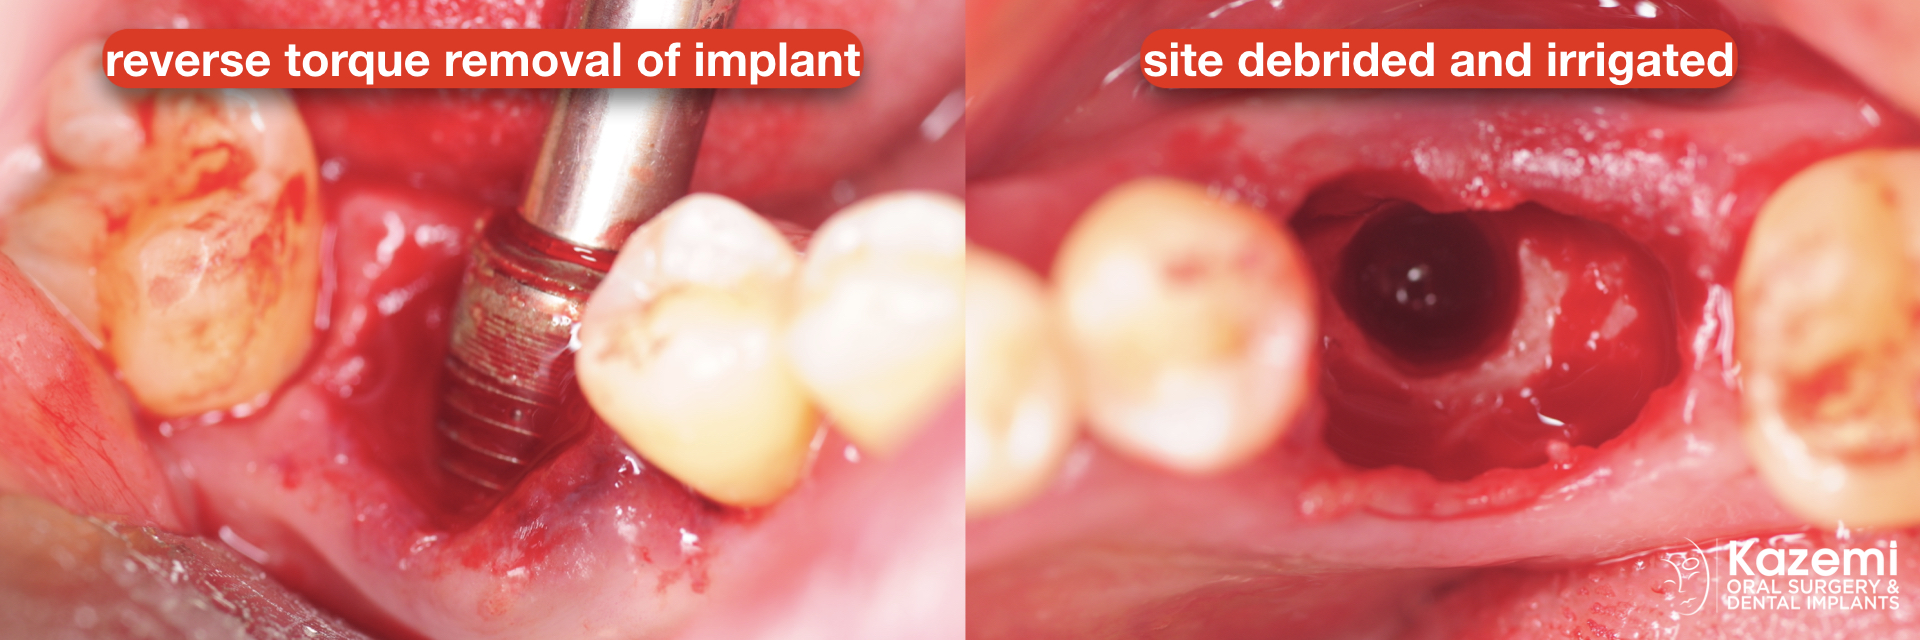 Peri-implantitis-secondary-to-residual-cement-and-plaque-calculus-biofilm-on-the-tissue-surface-of-the-restoration-kazemi-oral-surgery-4